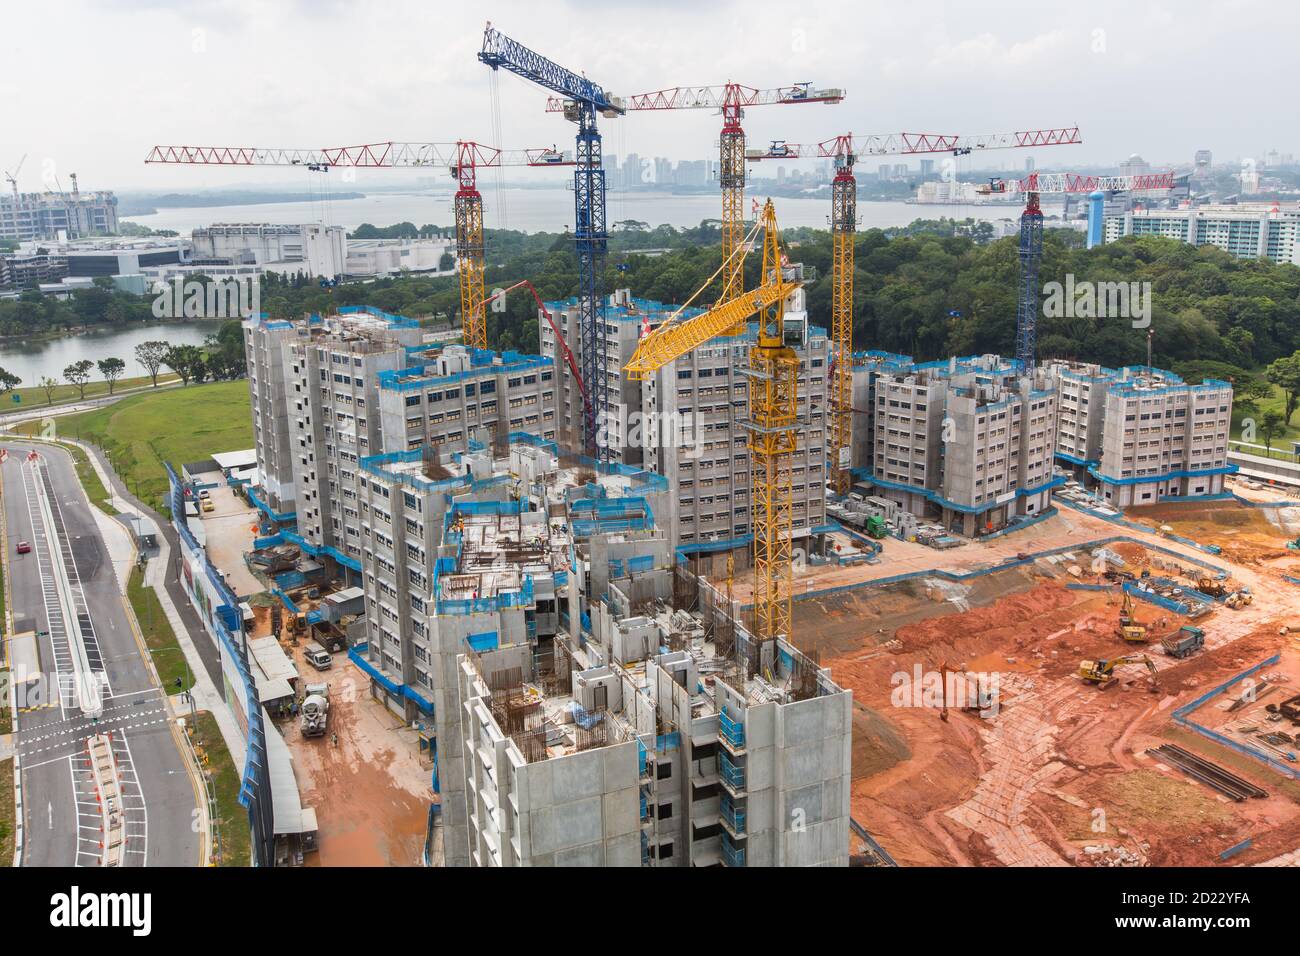 Housing construction in progress in northern part of Singapore. Stock Photo